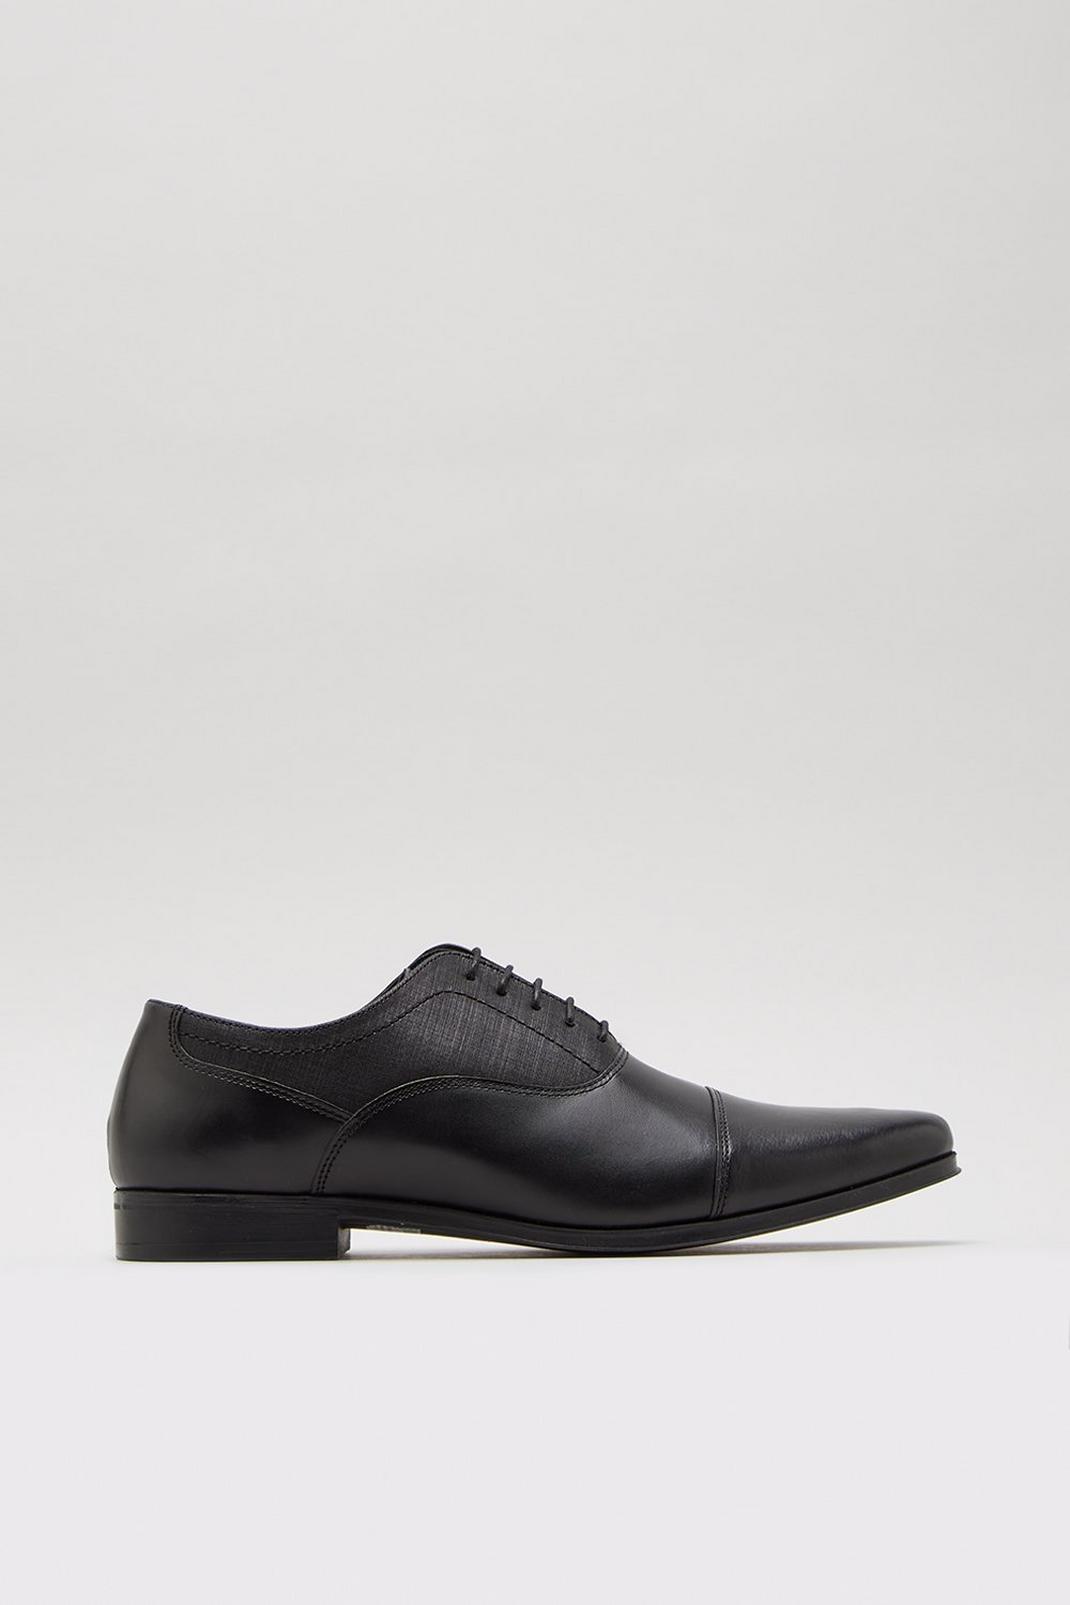 Black Leather Toe Cap Oxford Shoes image number 1